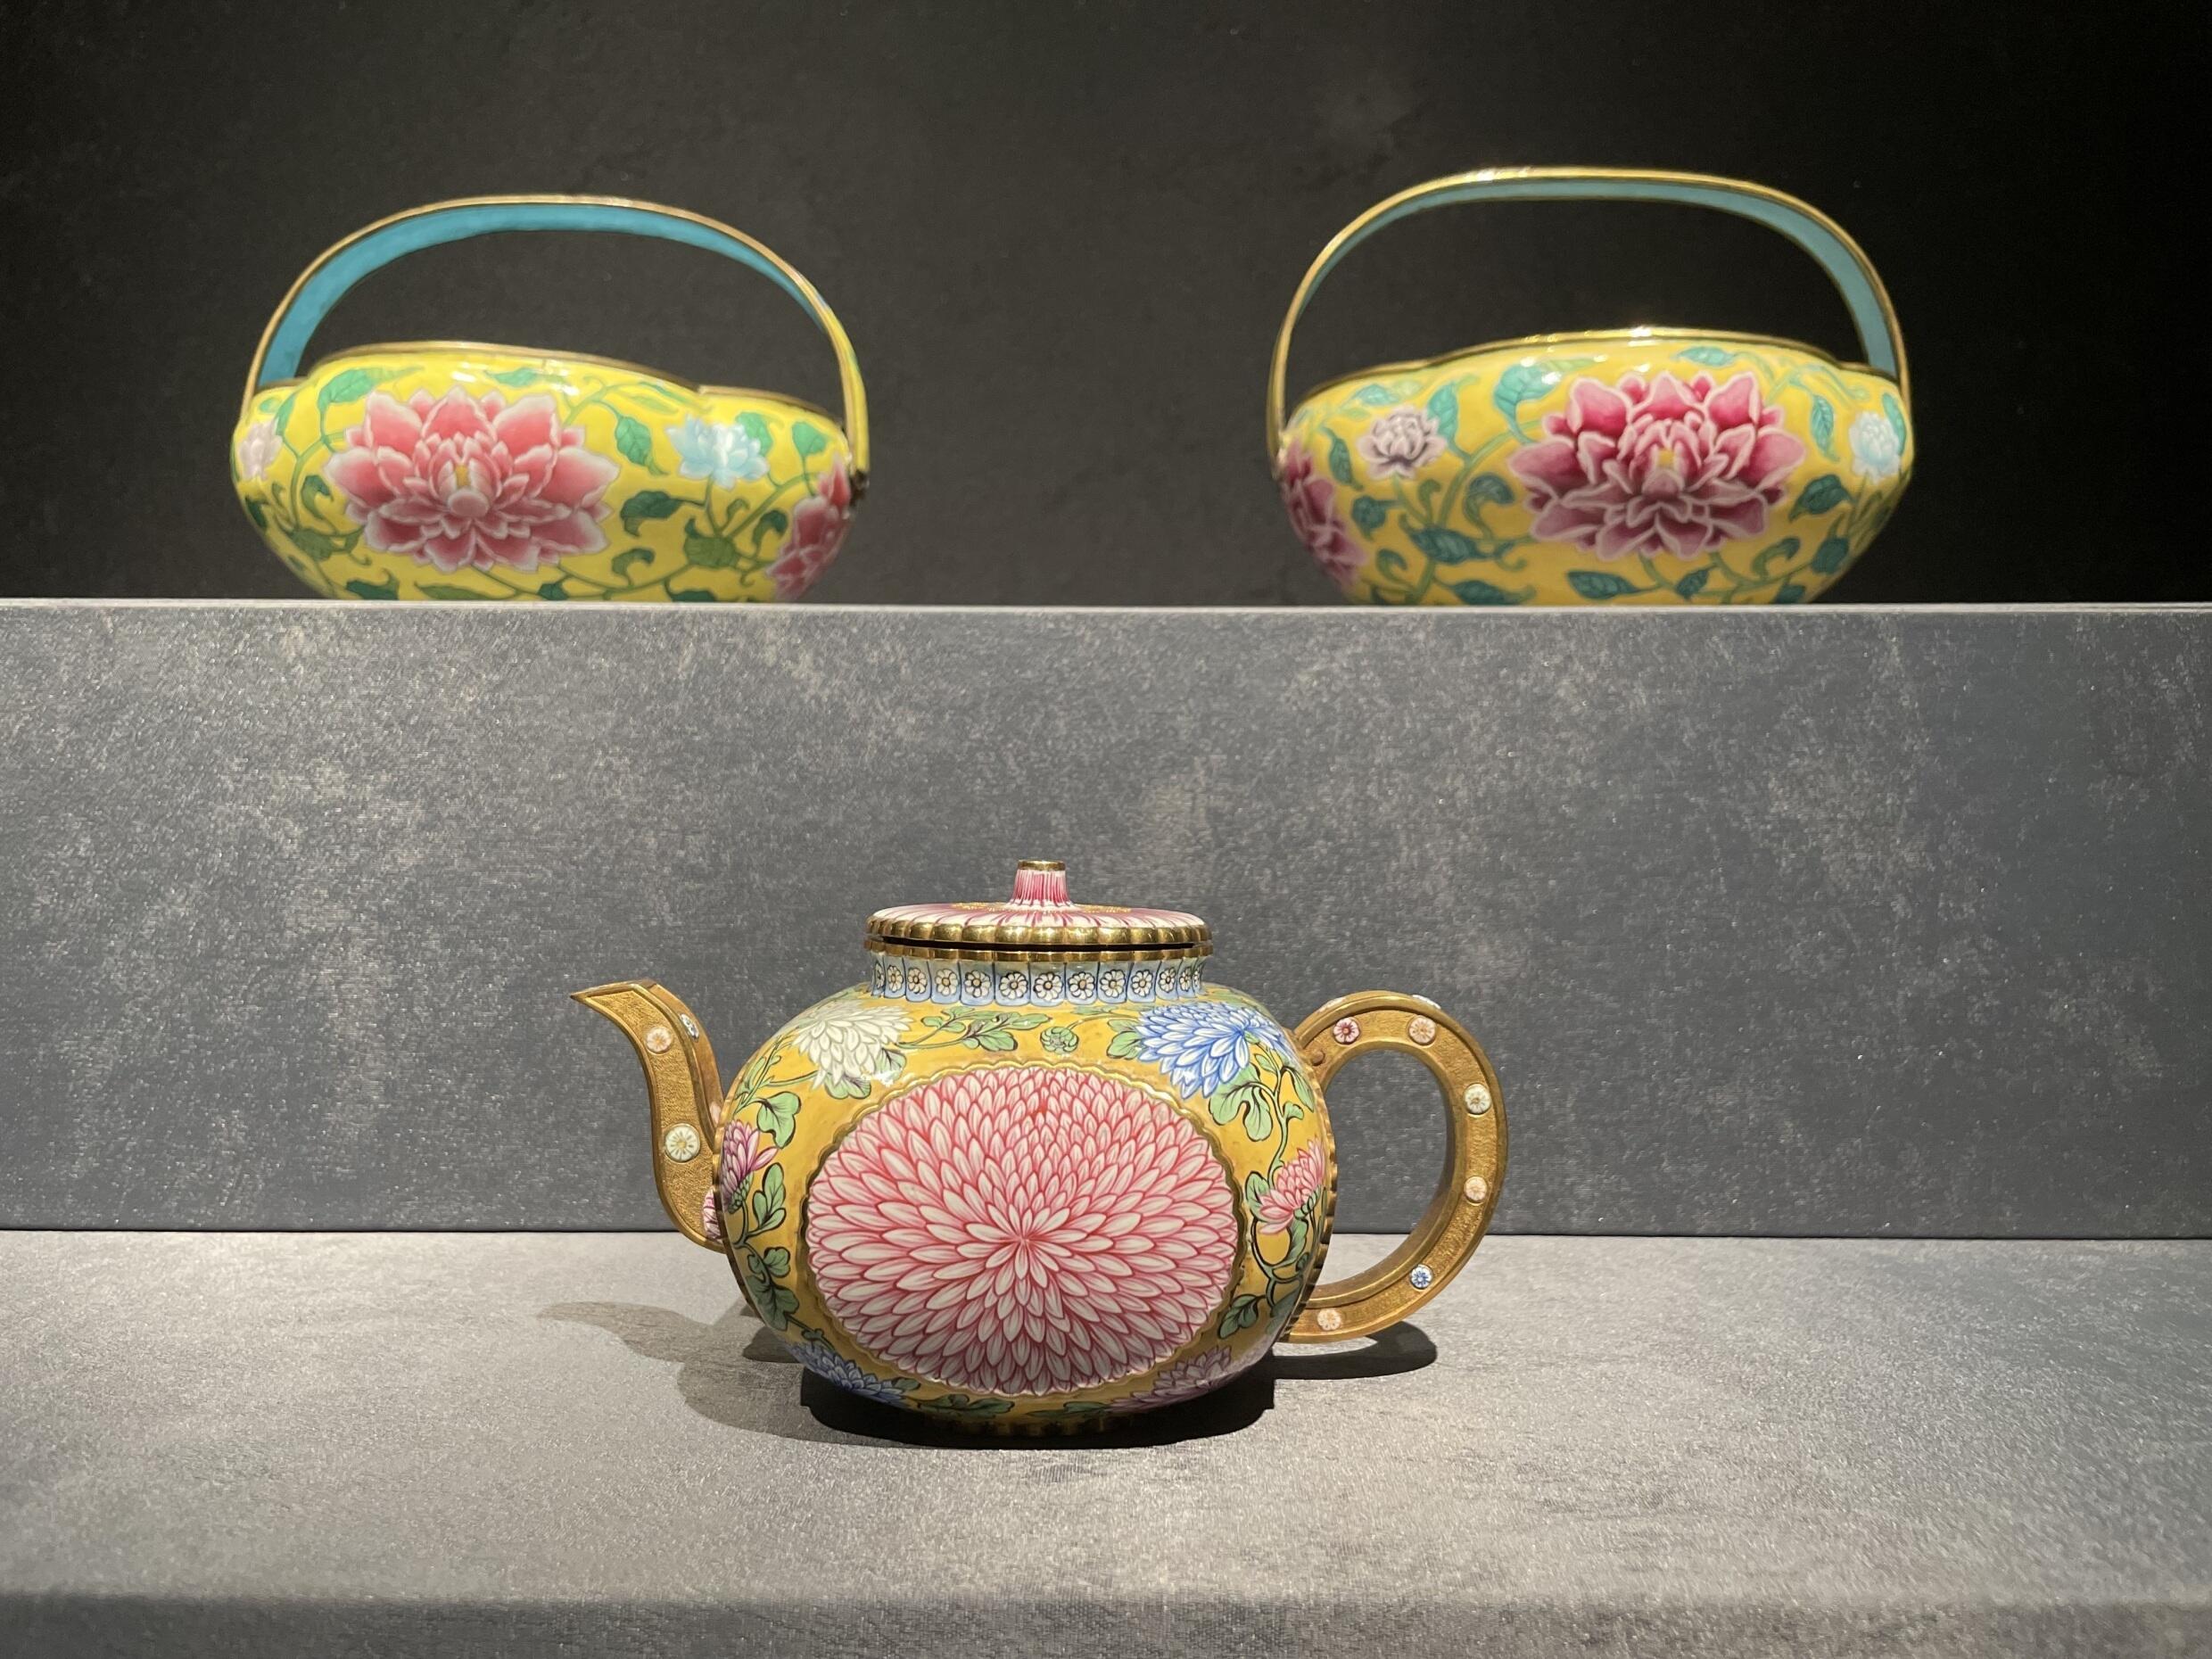 Enameled teapot by Joseph Coteau from the Sèvre factory, commissioned by the Emperor of China.